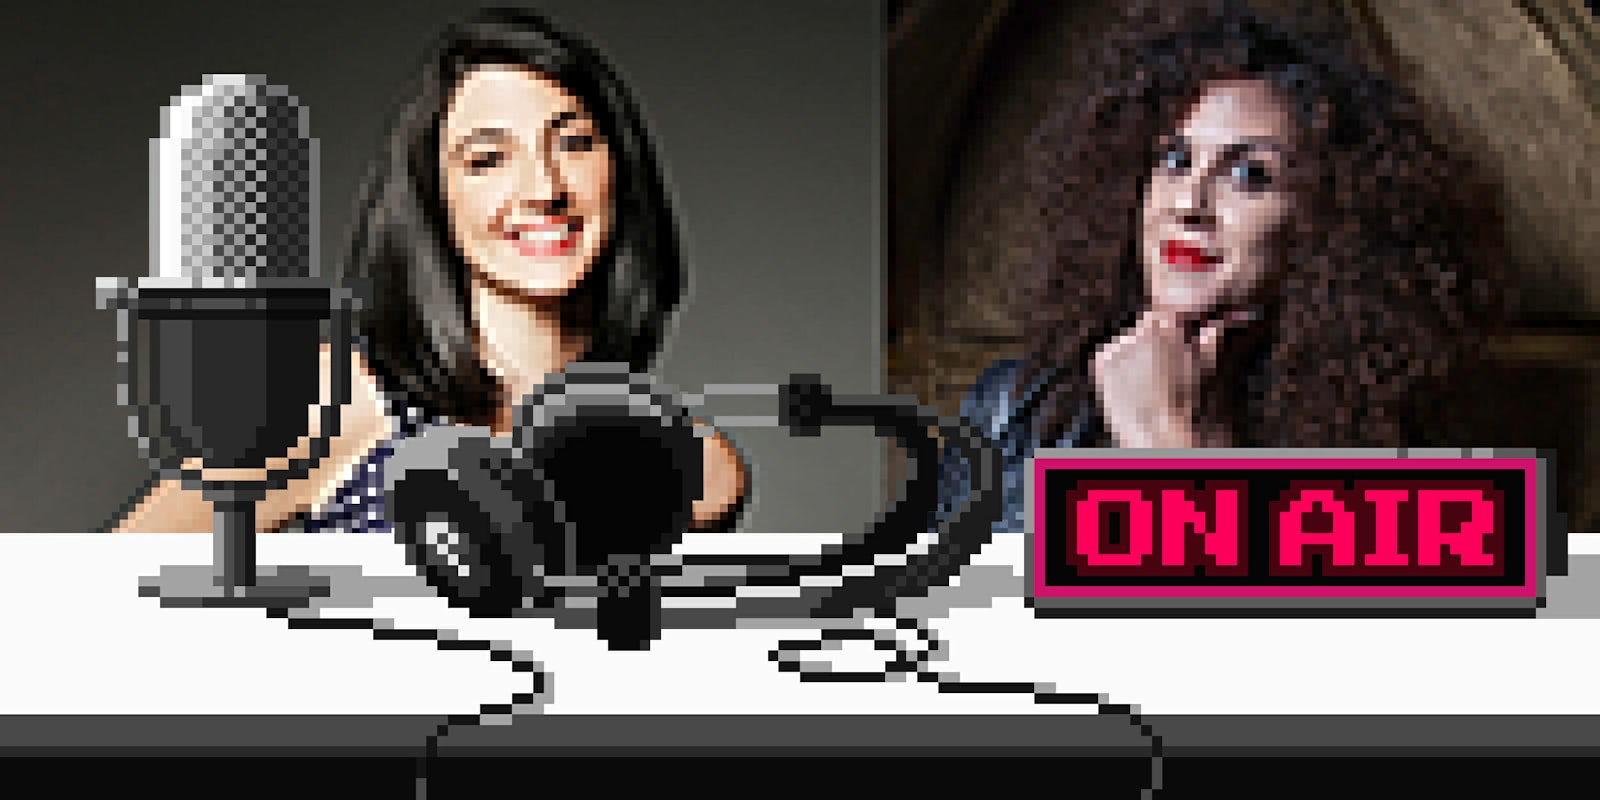 Upstream podcast talks with Marcella Arguello and Katie Rich